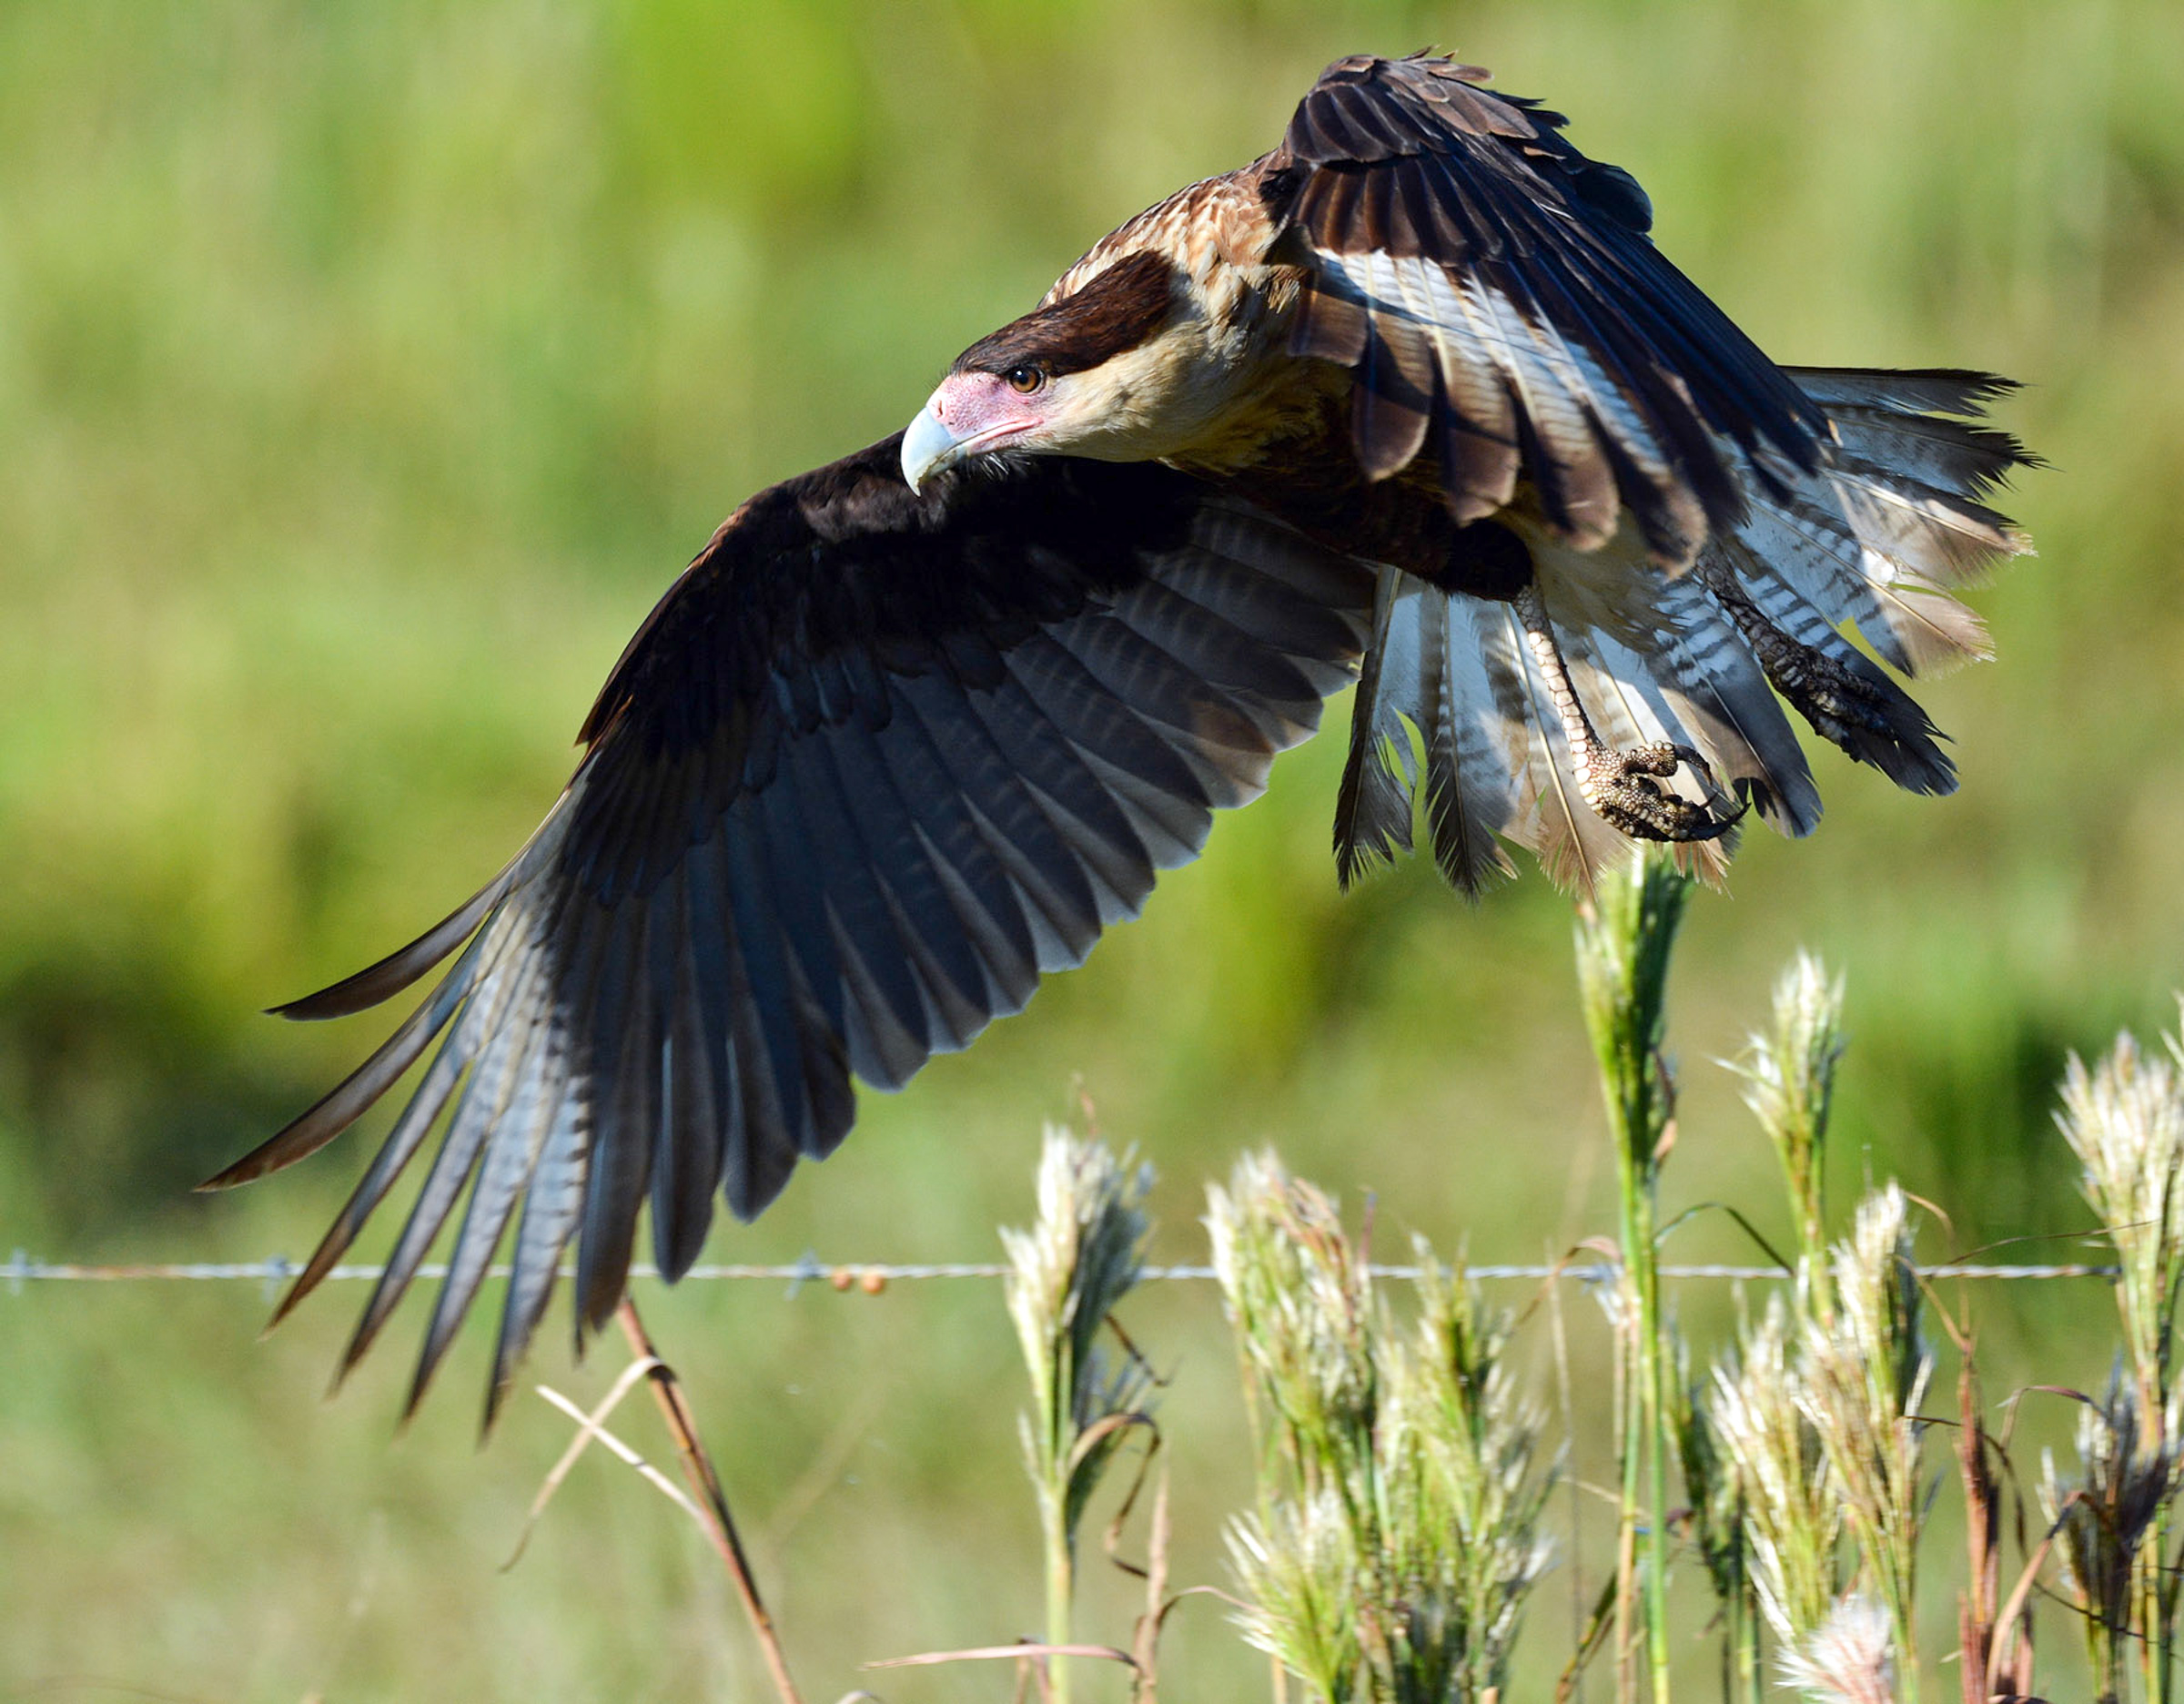 Crested Caracara in flight over grasses.